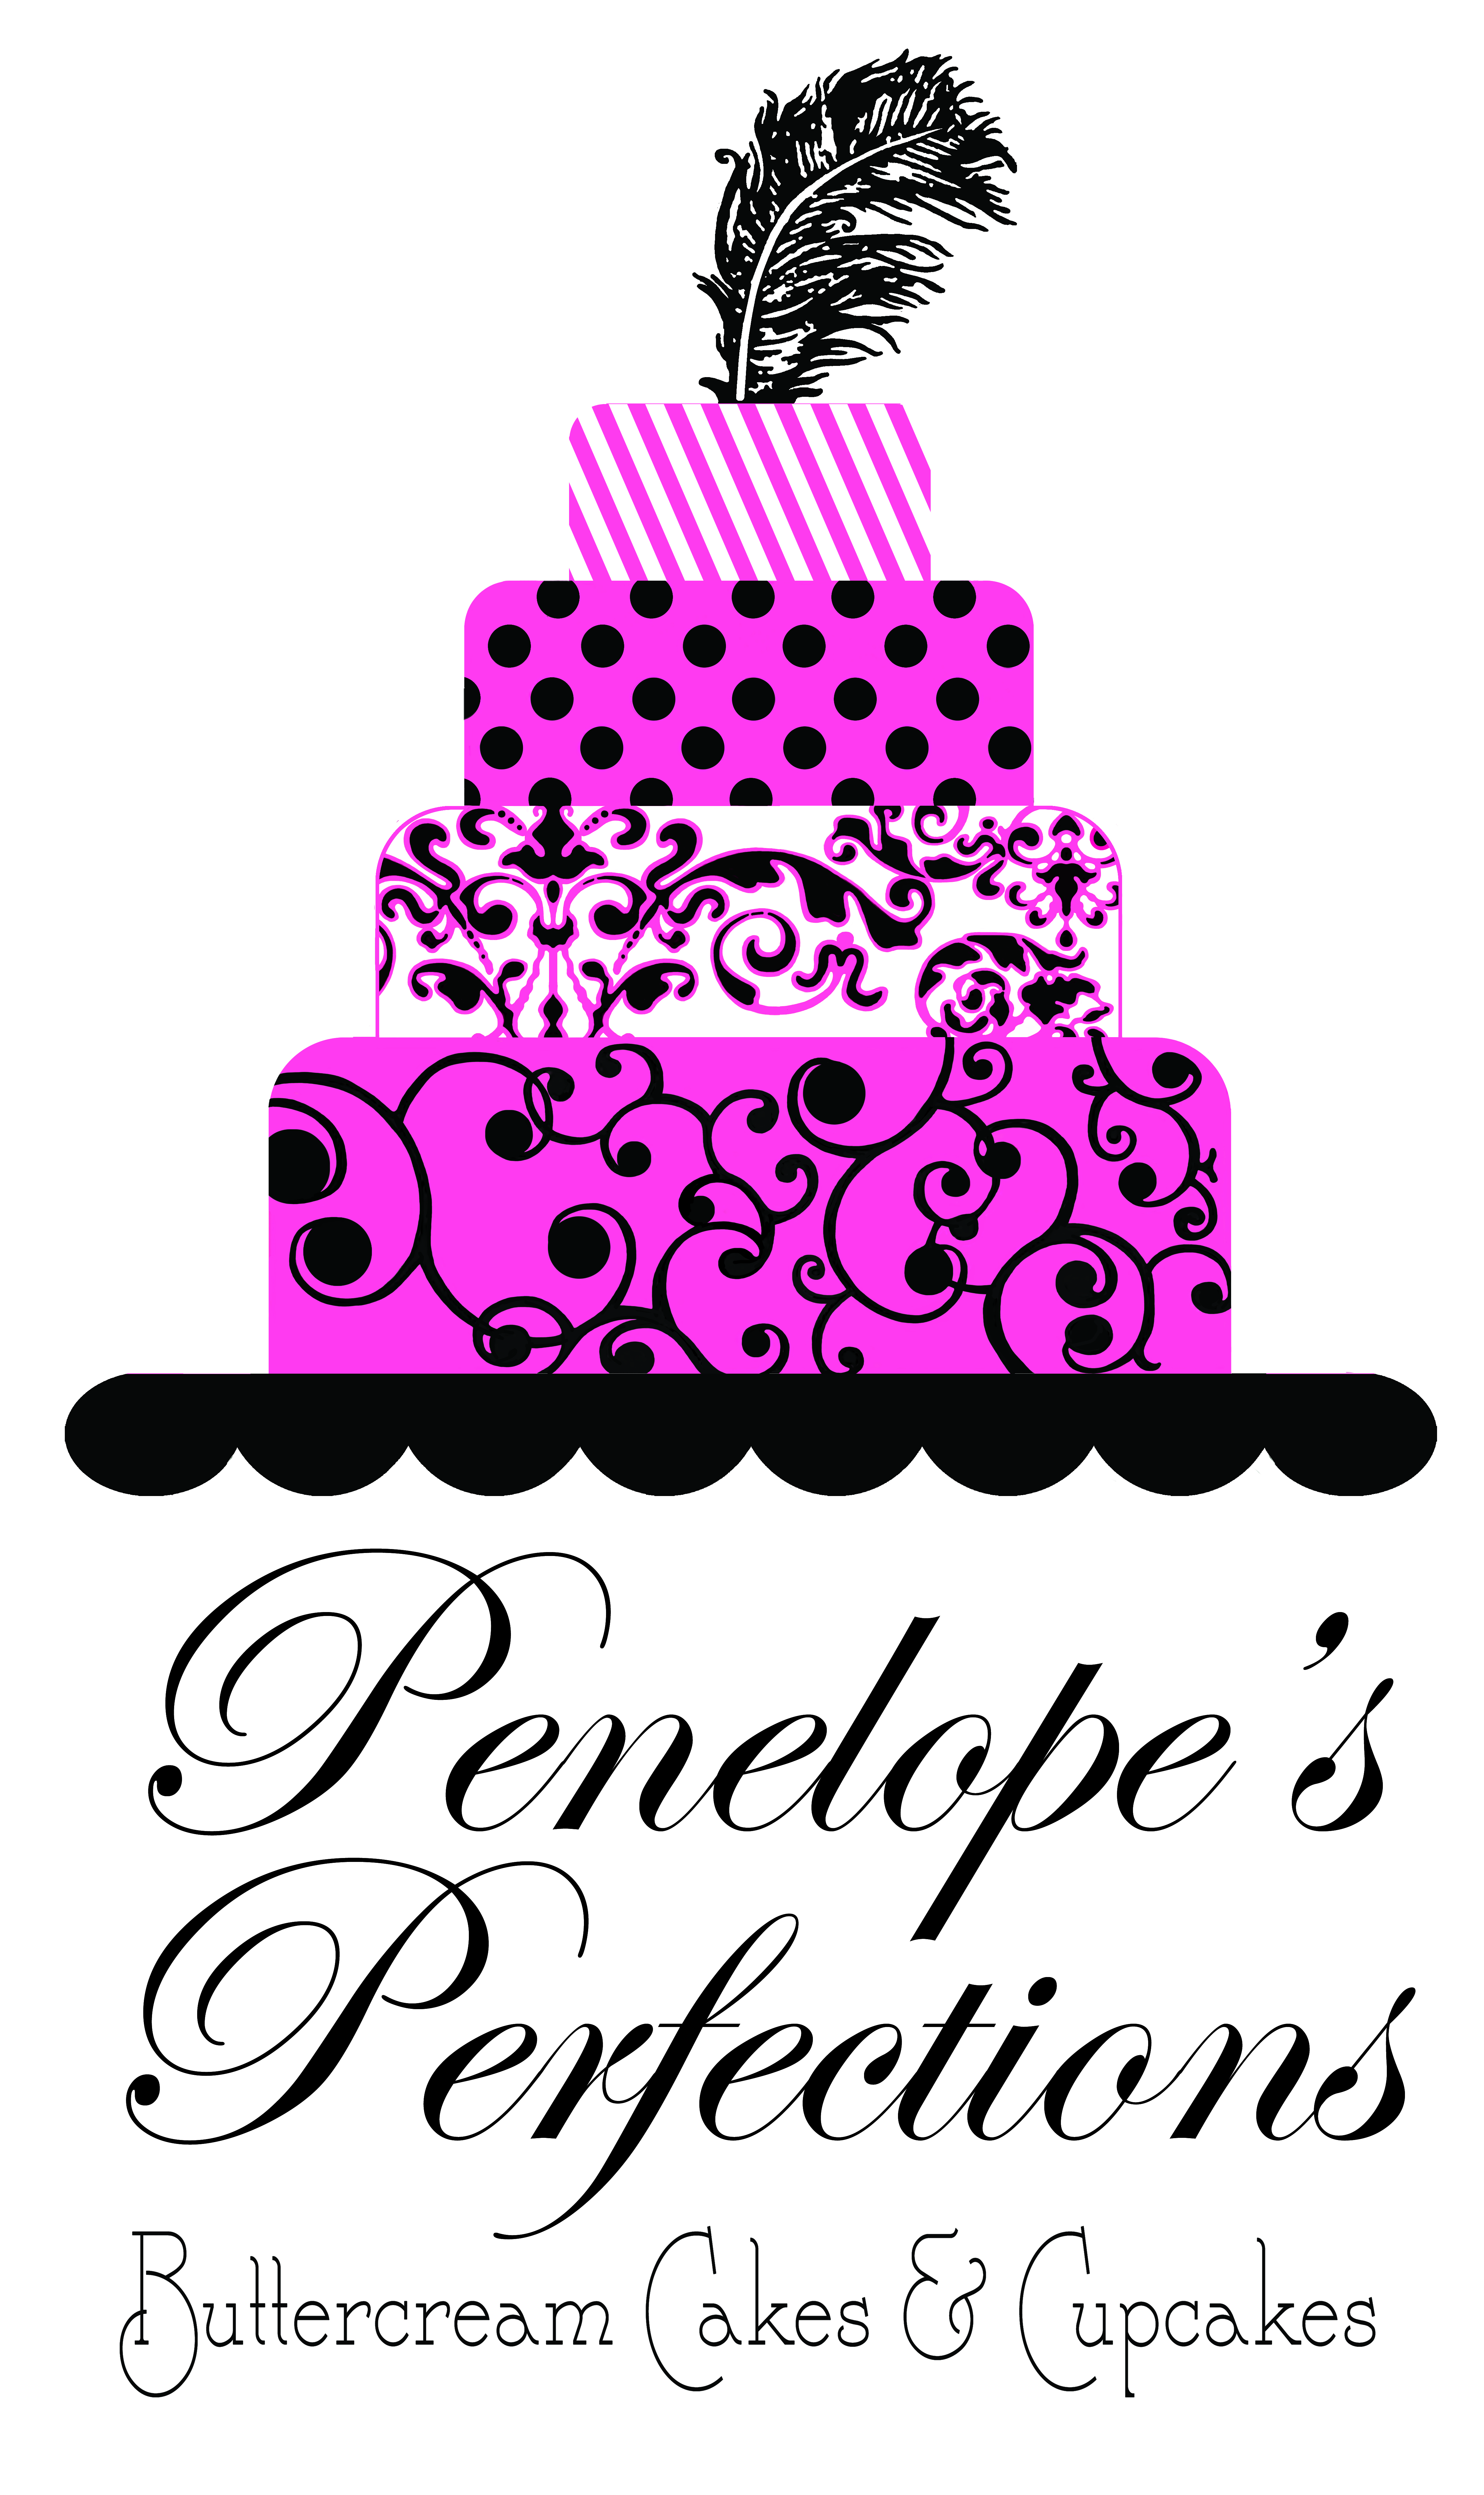 Penelope's Perfections Bakery